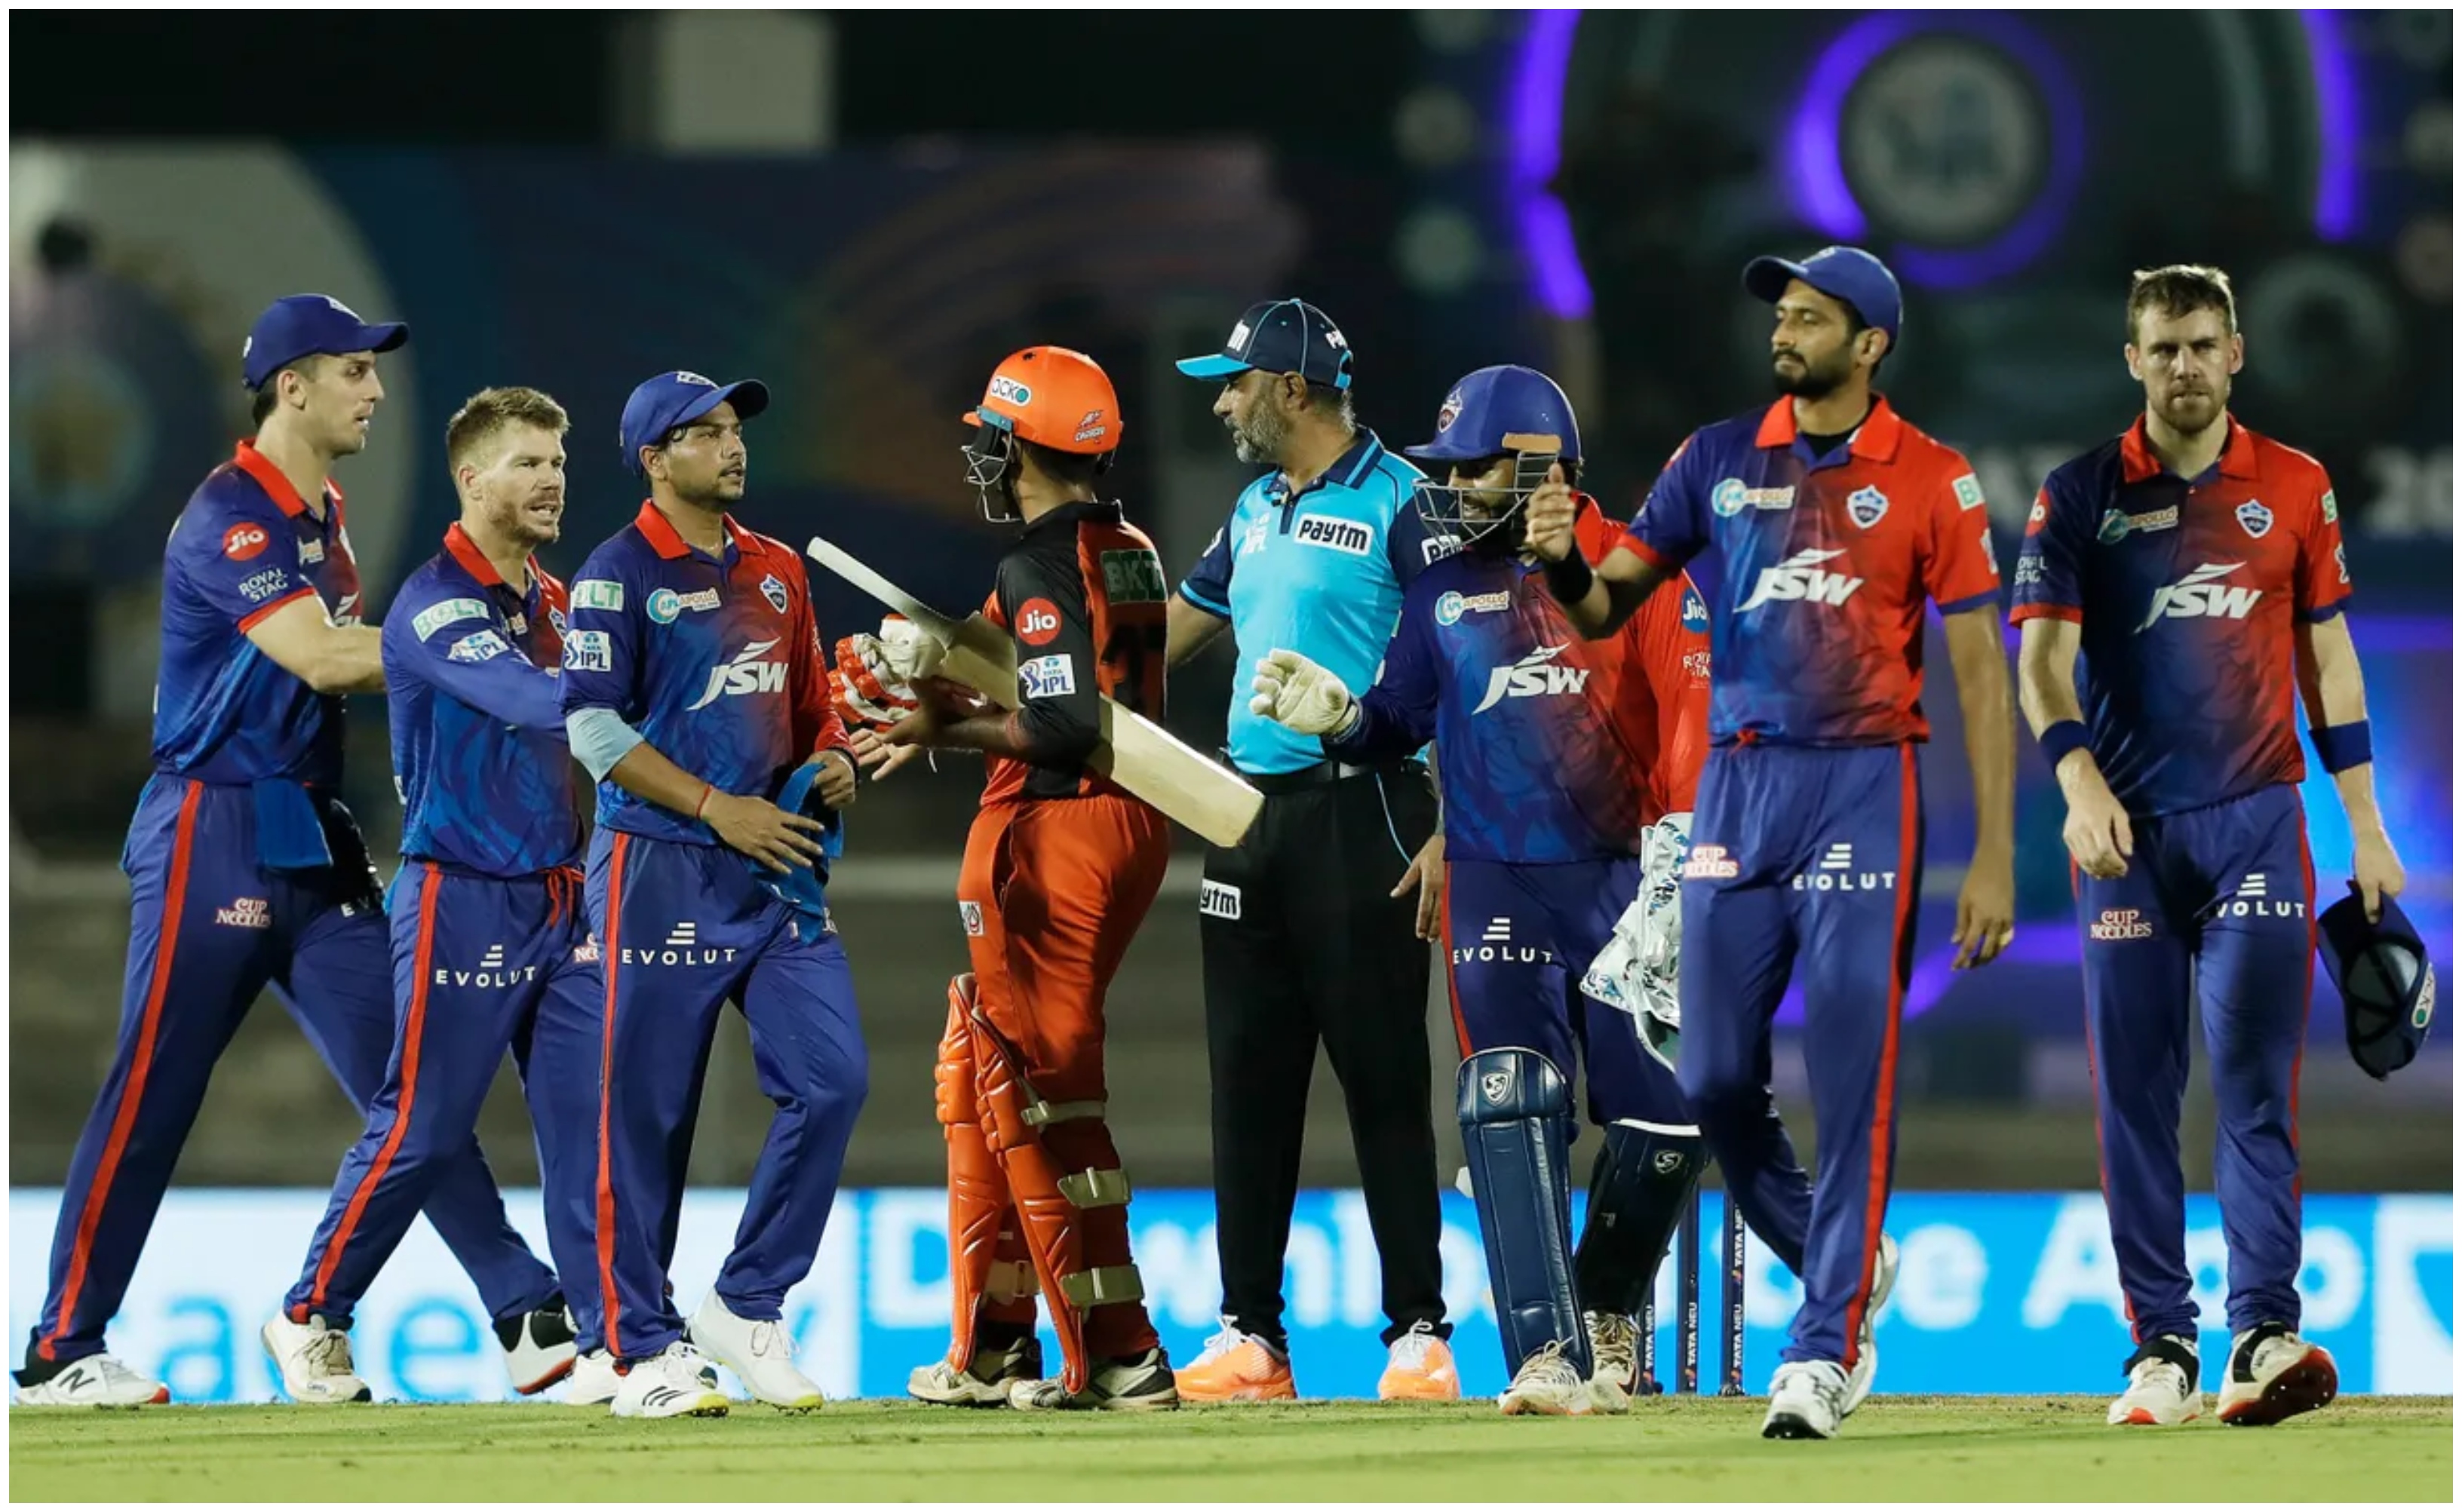 DC outplayed SRH in all departments | BCCI/IPL